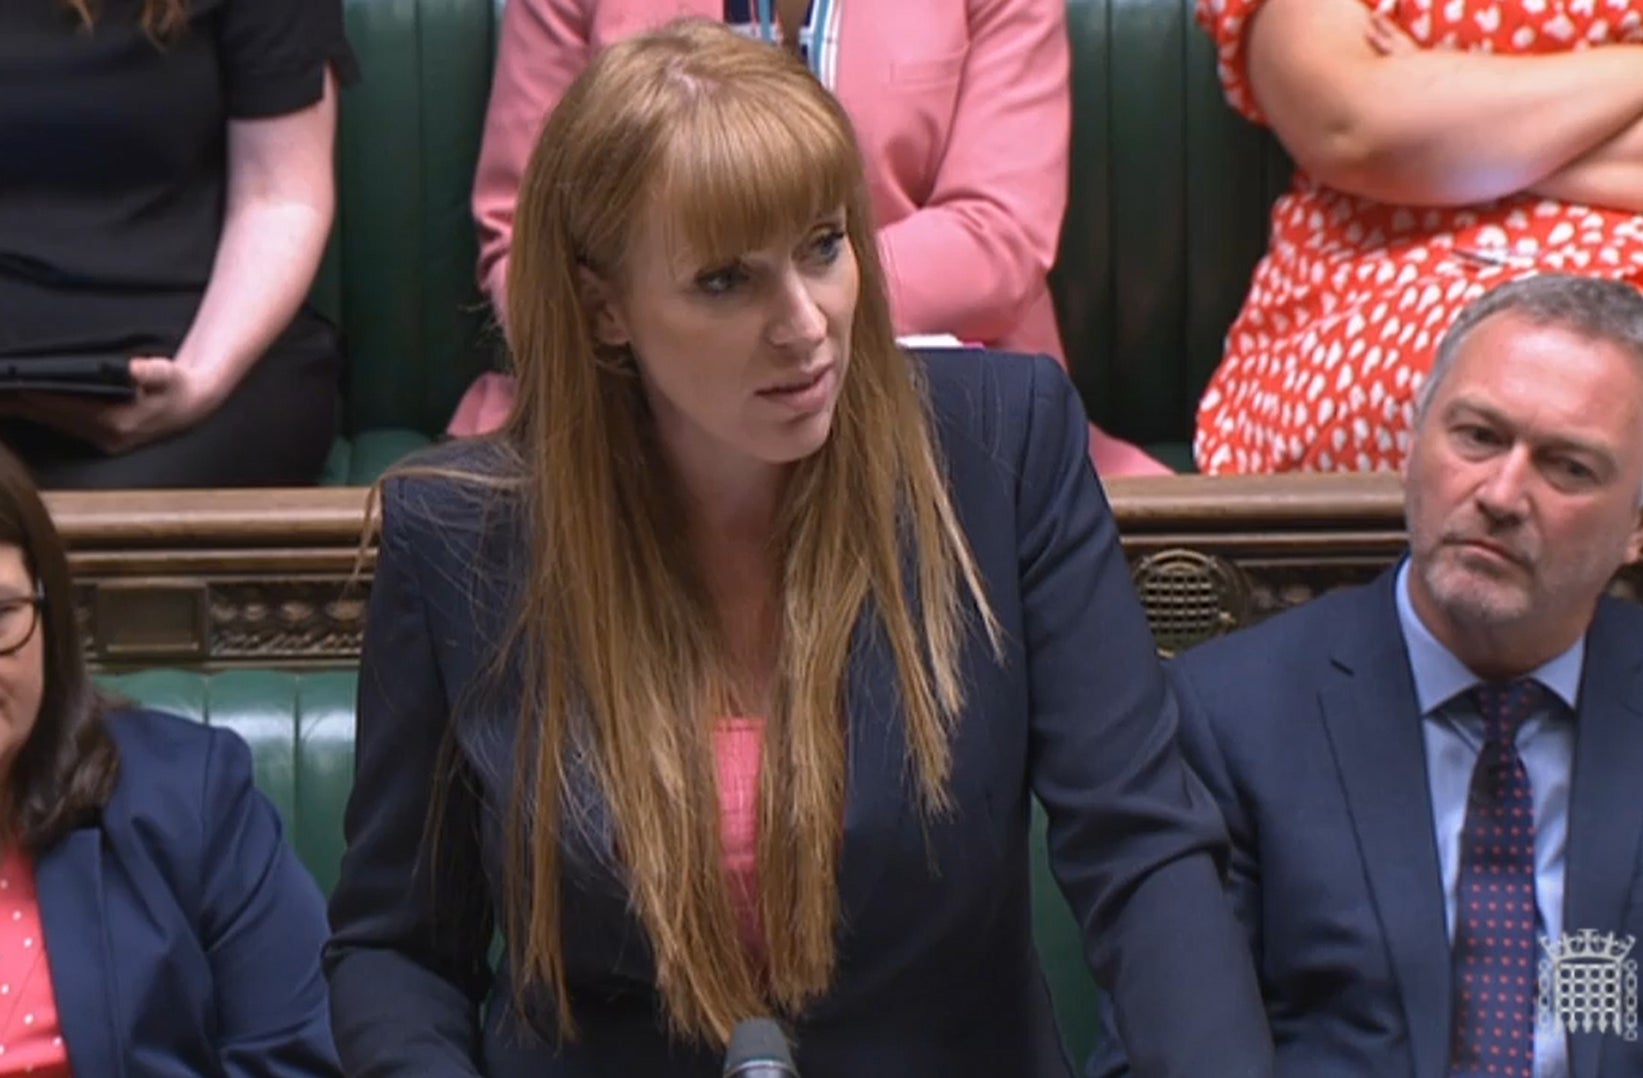 Ms Rayner said the Tory minister “should be ashamed of herself”